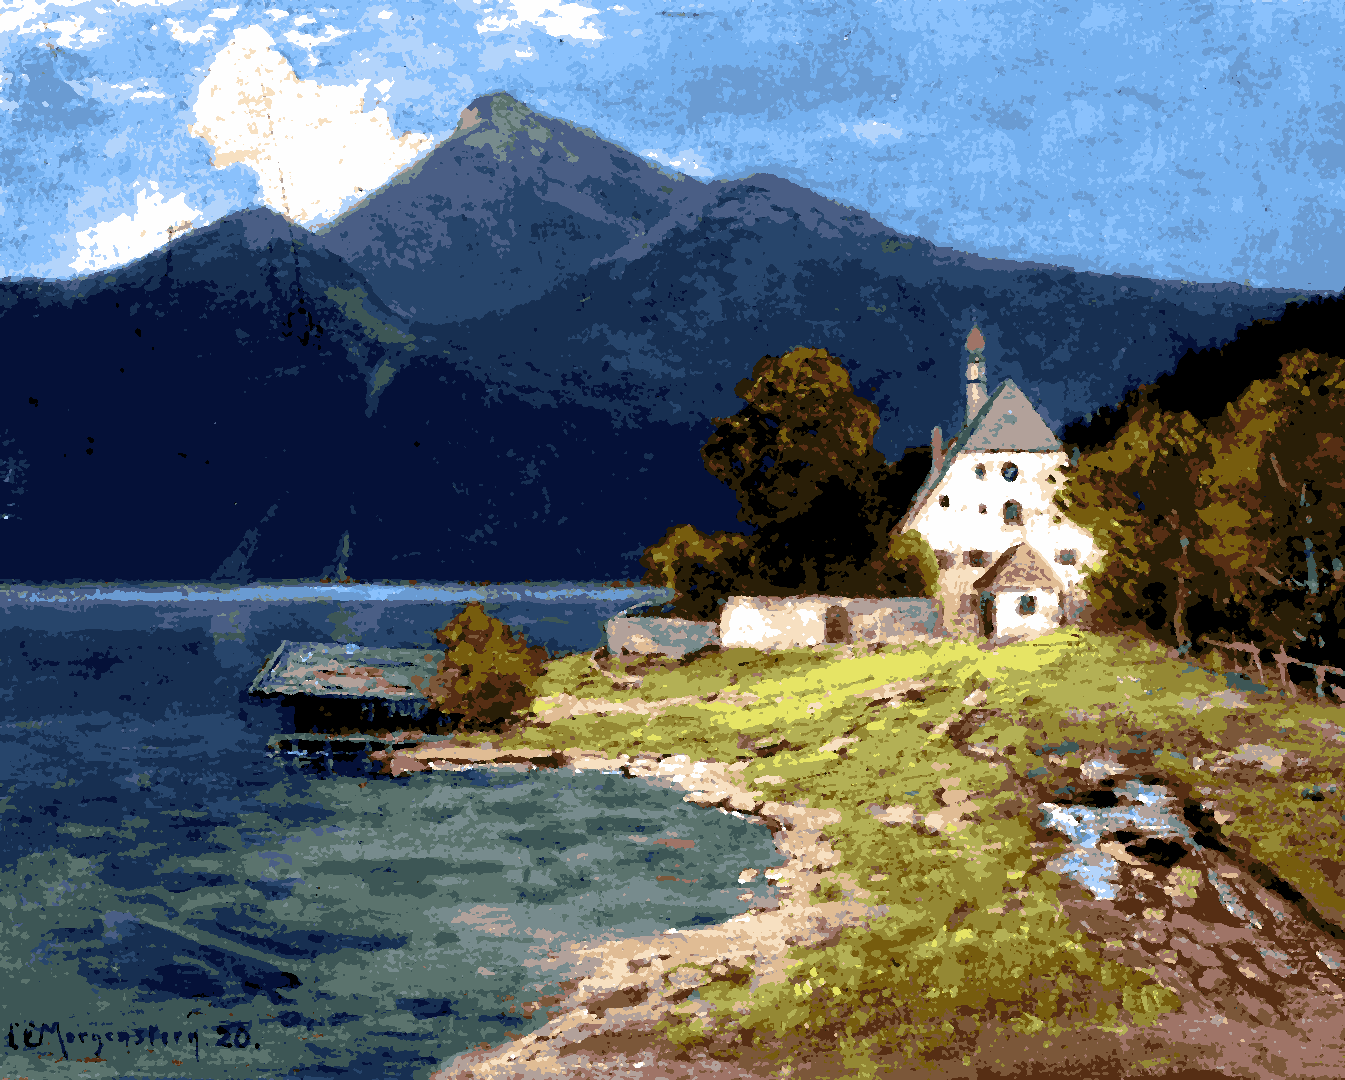 Landscape with a lake in the mountains by Carl Ernst Morgenstern - Van-Go Paint-By-Number Kit